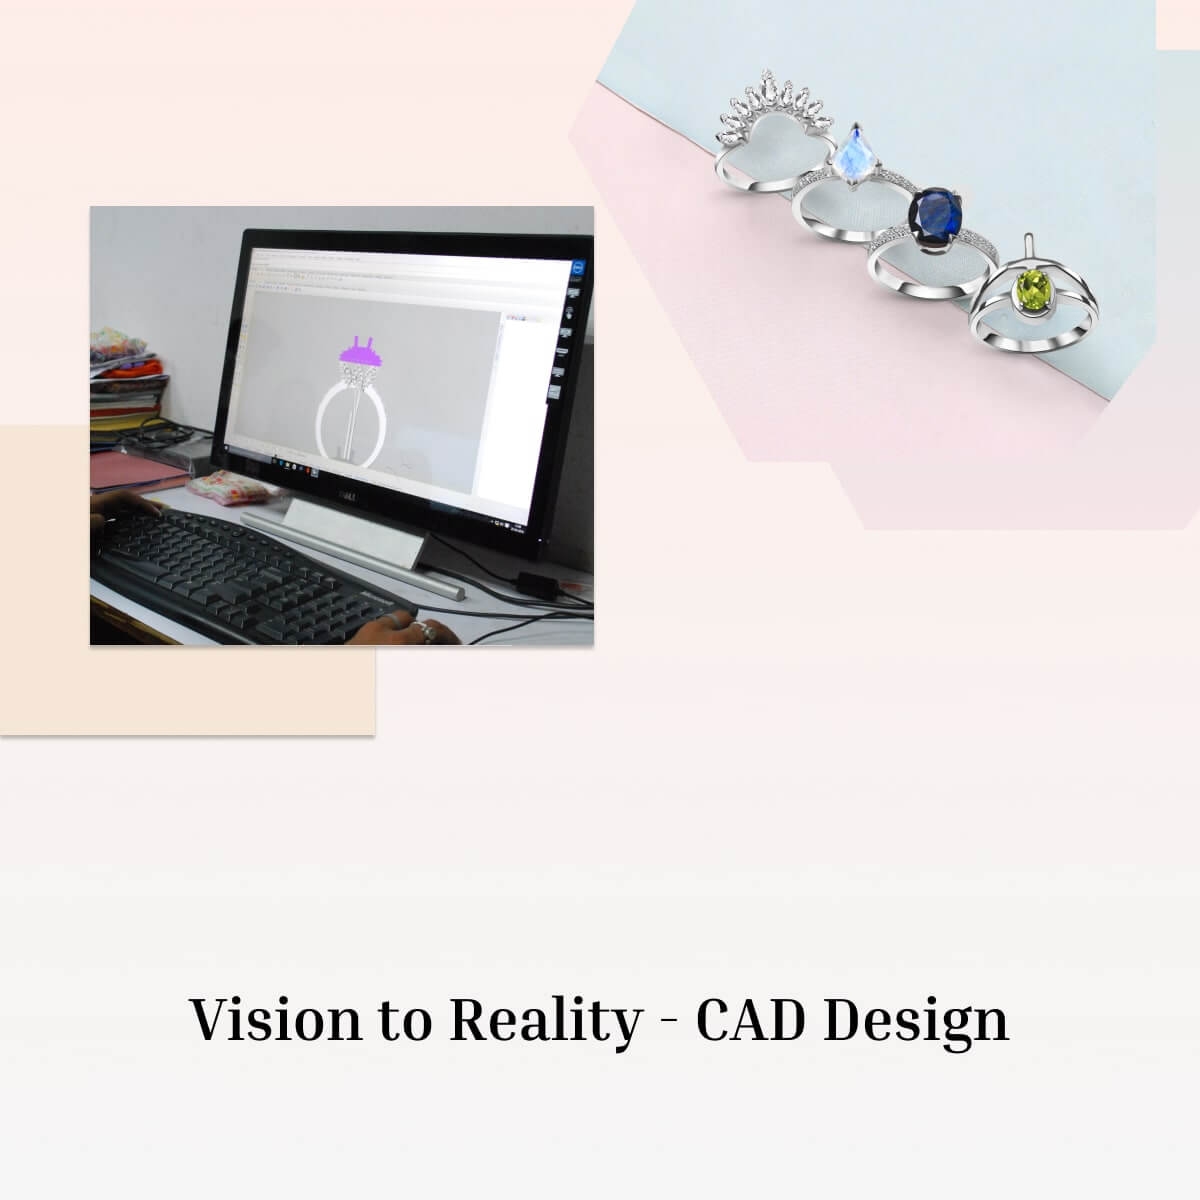 CAD software is used to create your design